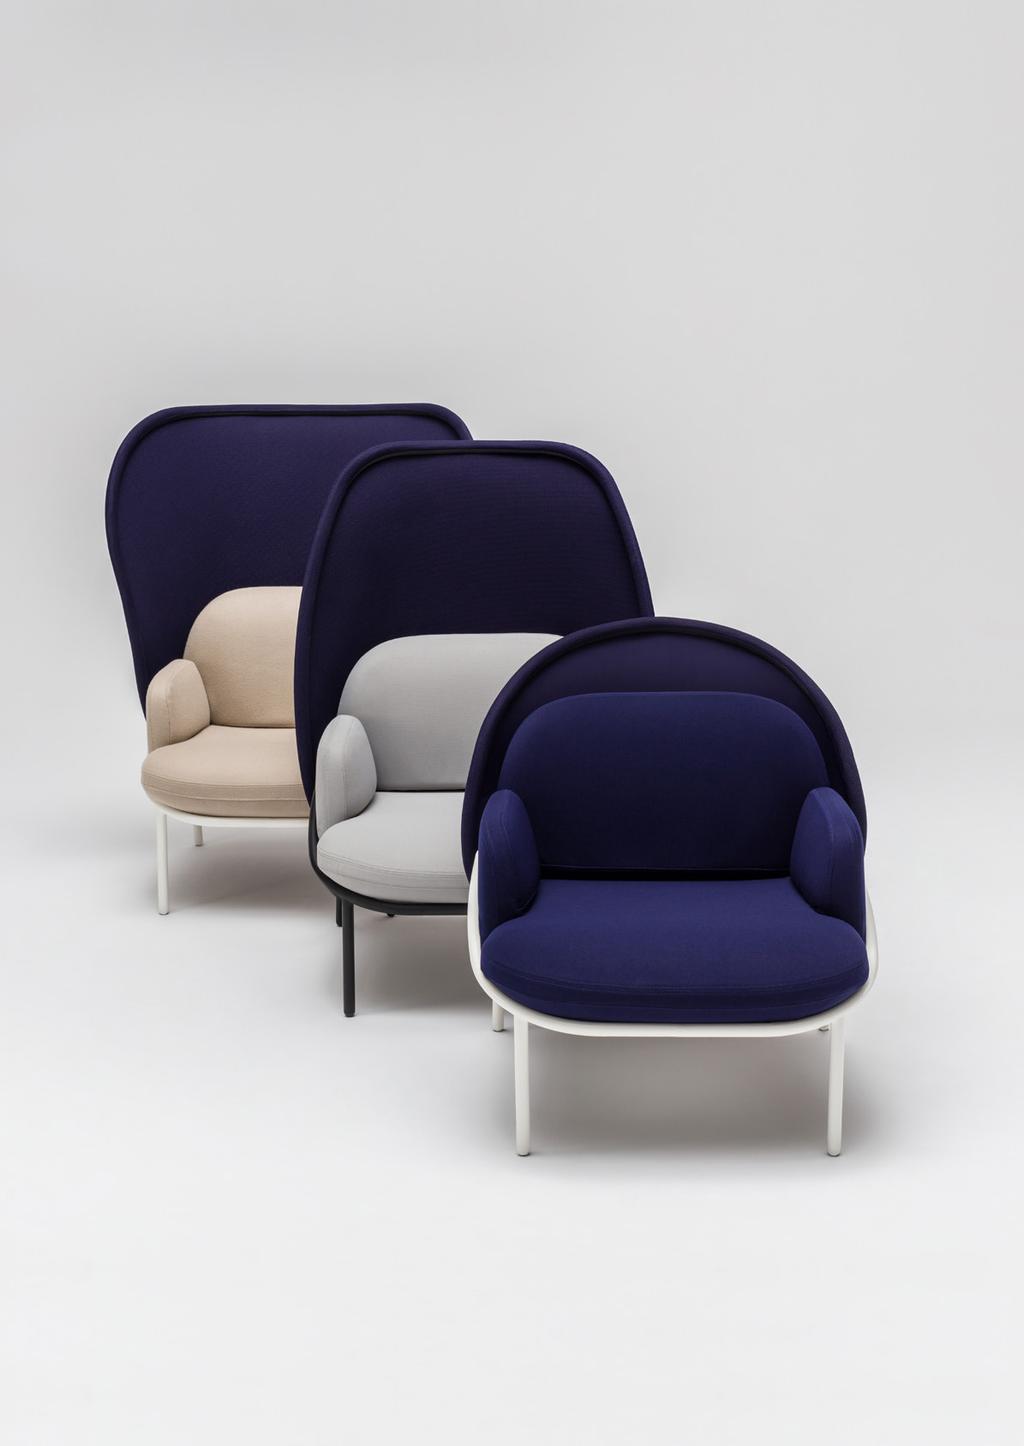 Mesh Armchair The Mesh Armchair is a perfect solution not only due to its practical function it may serve as the focal point of an arrangement.